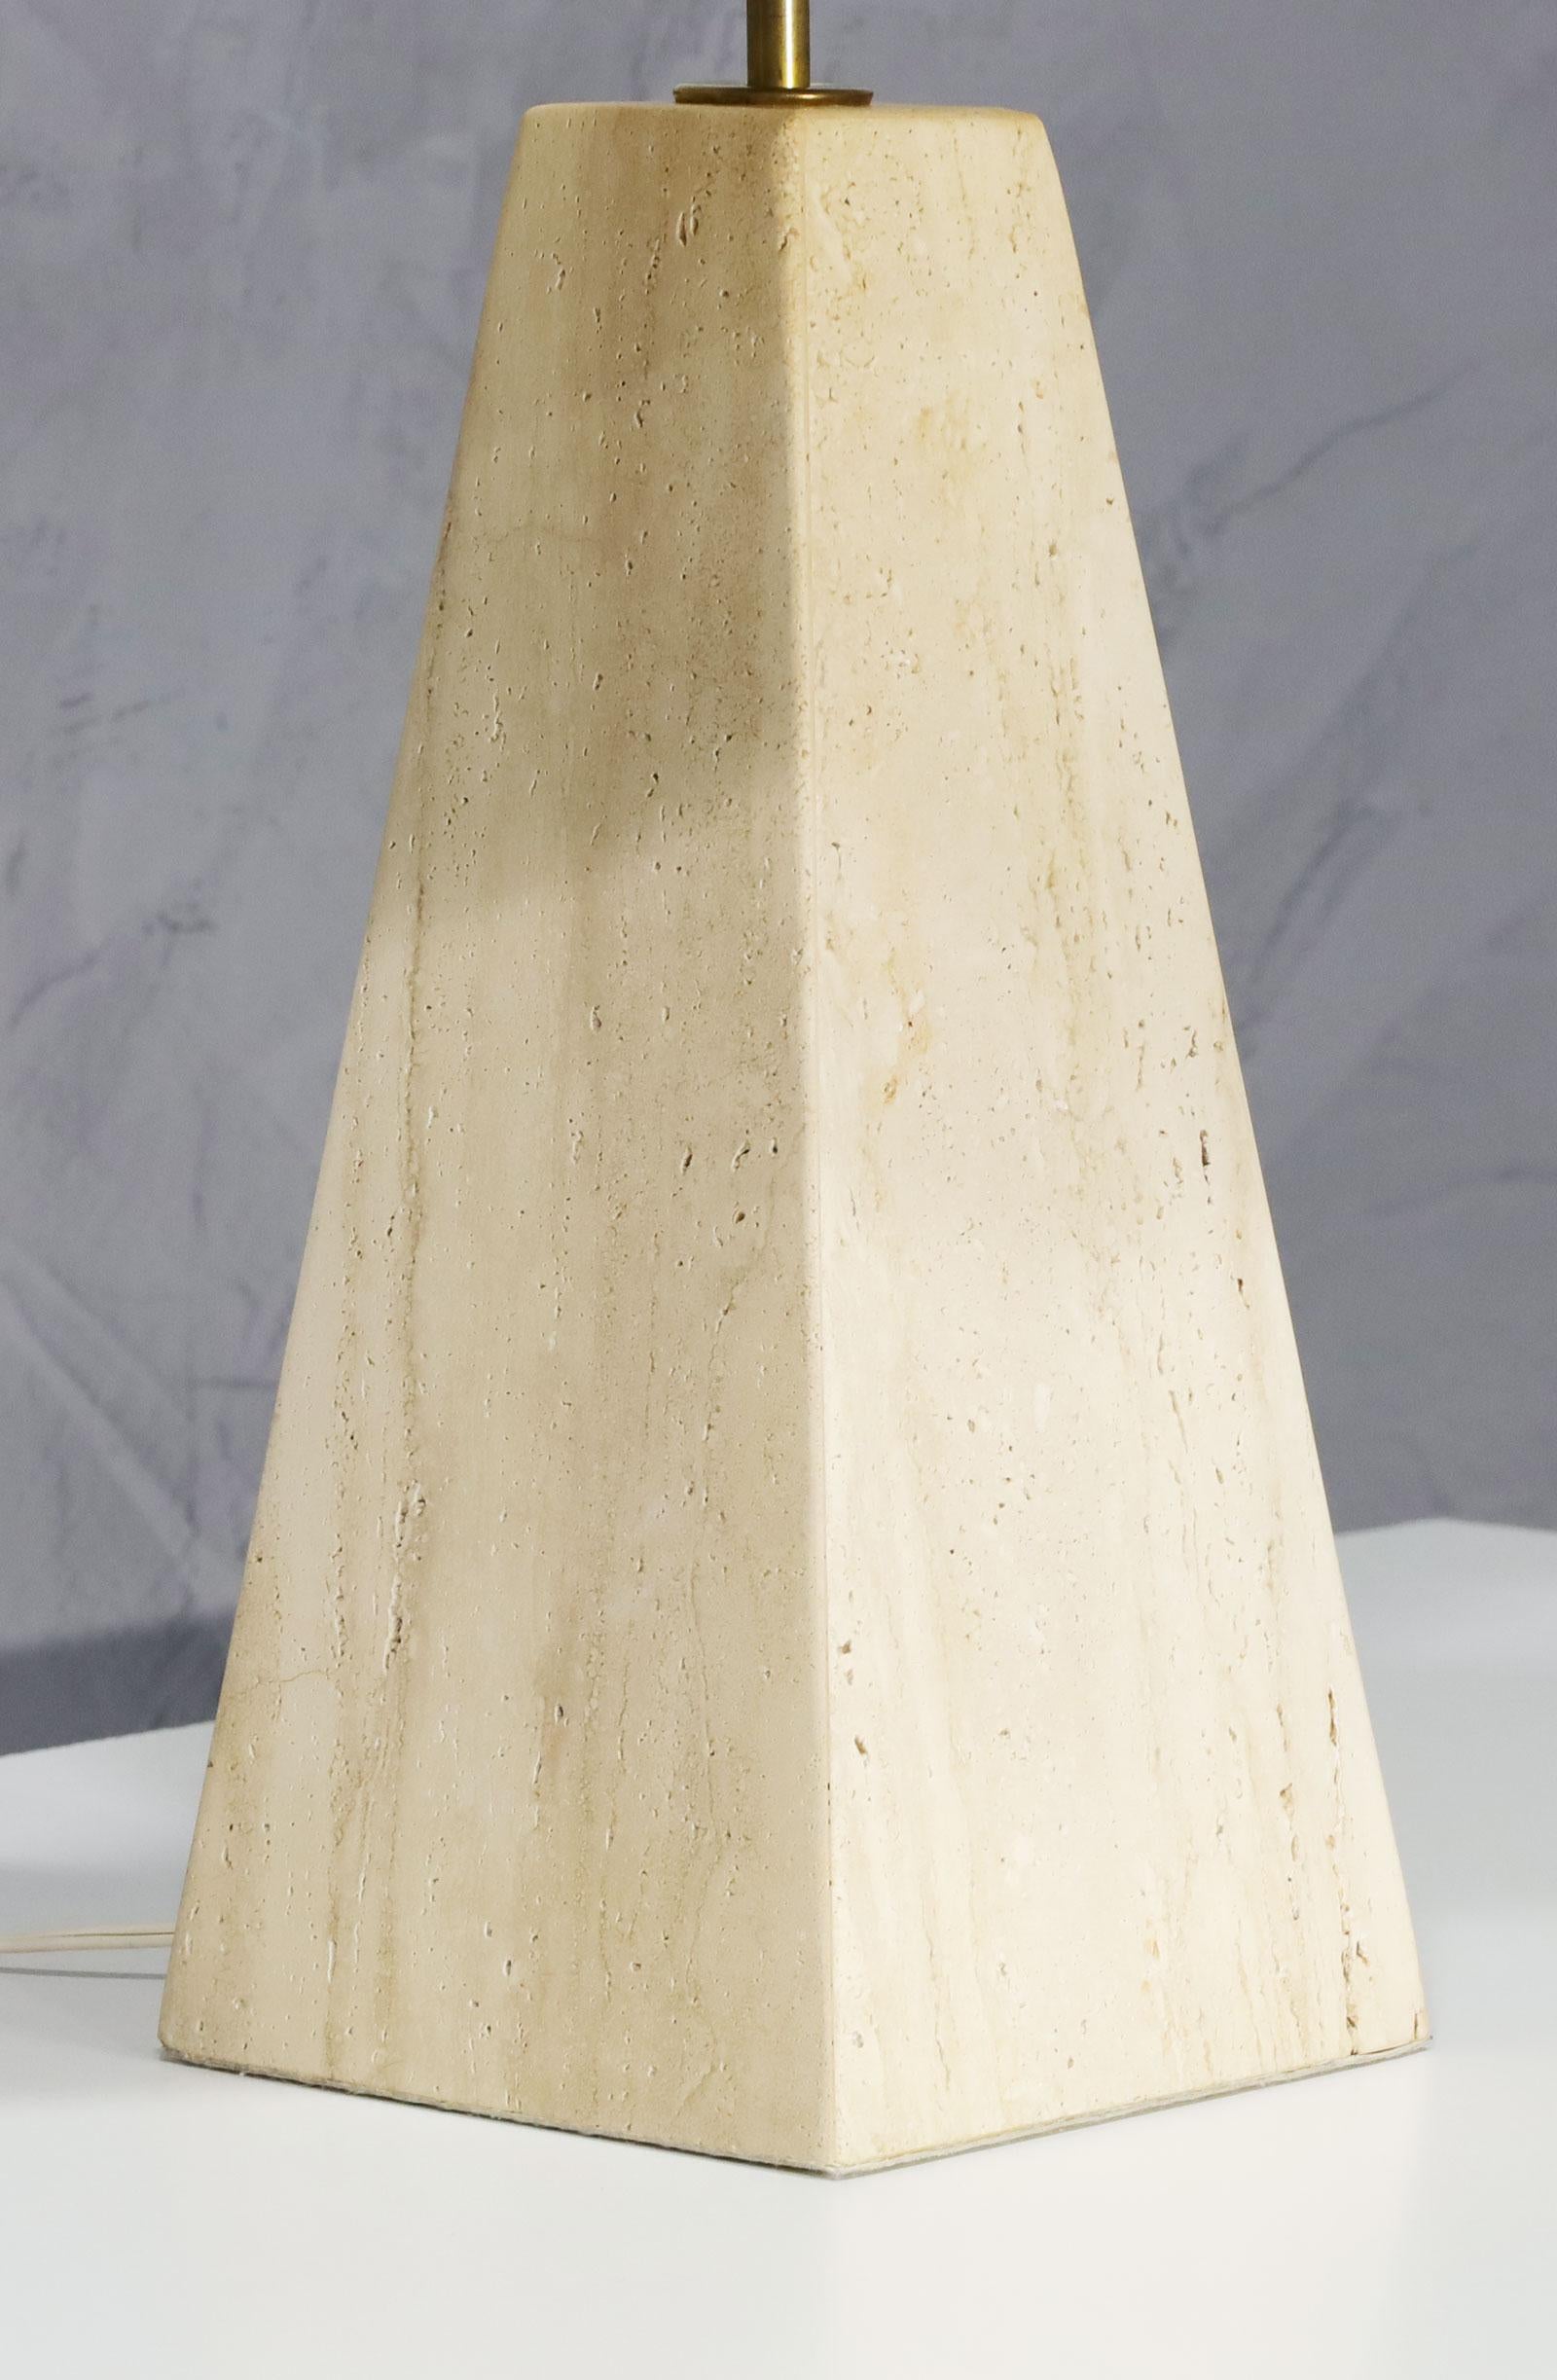 Beautifully simple organic travertine table lamp in a pyramid shape. The lamp base is 7.38